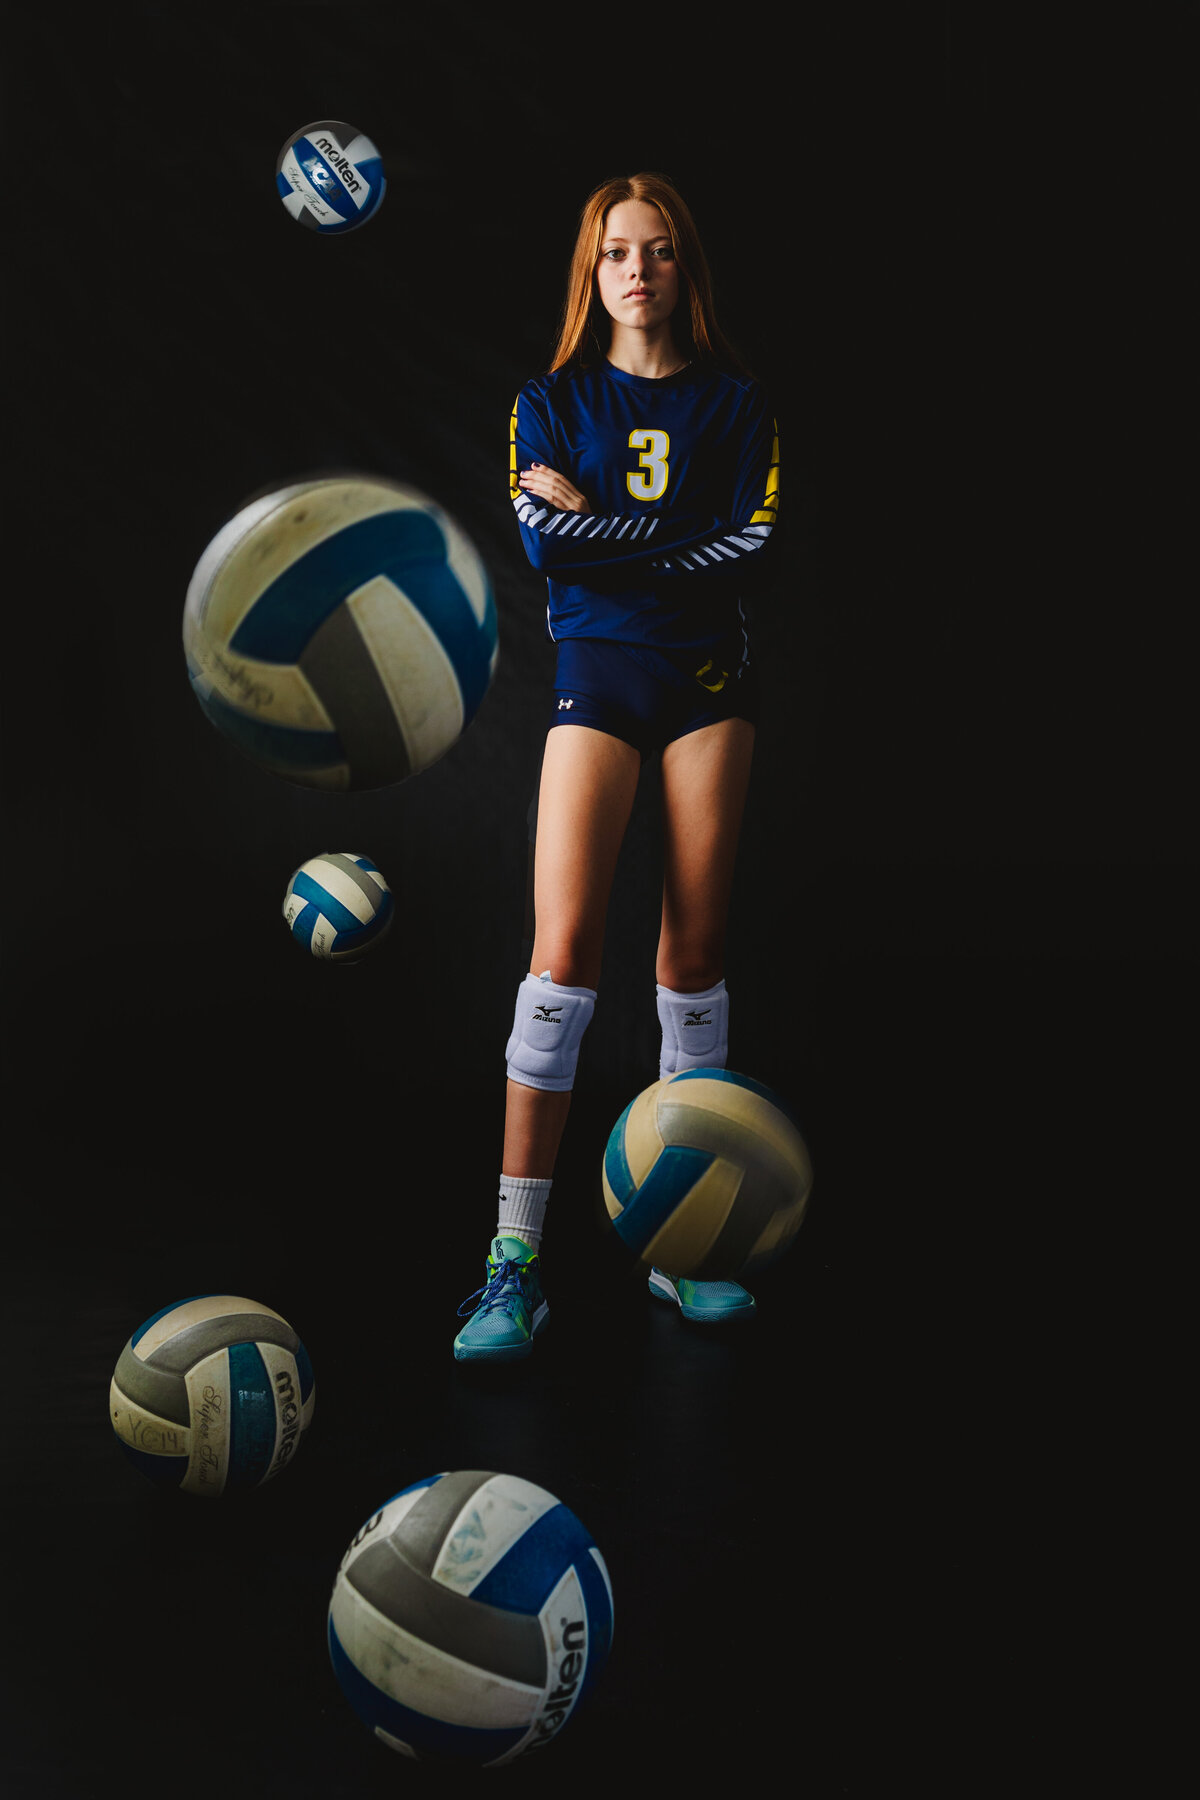 Camp-Hill-Sports-Photos-Teen-Volleyball-player-Slice-of-Lime-Molten-Ball